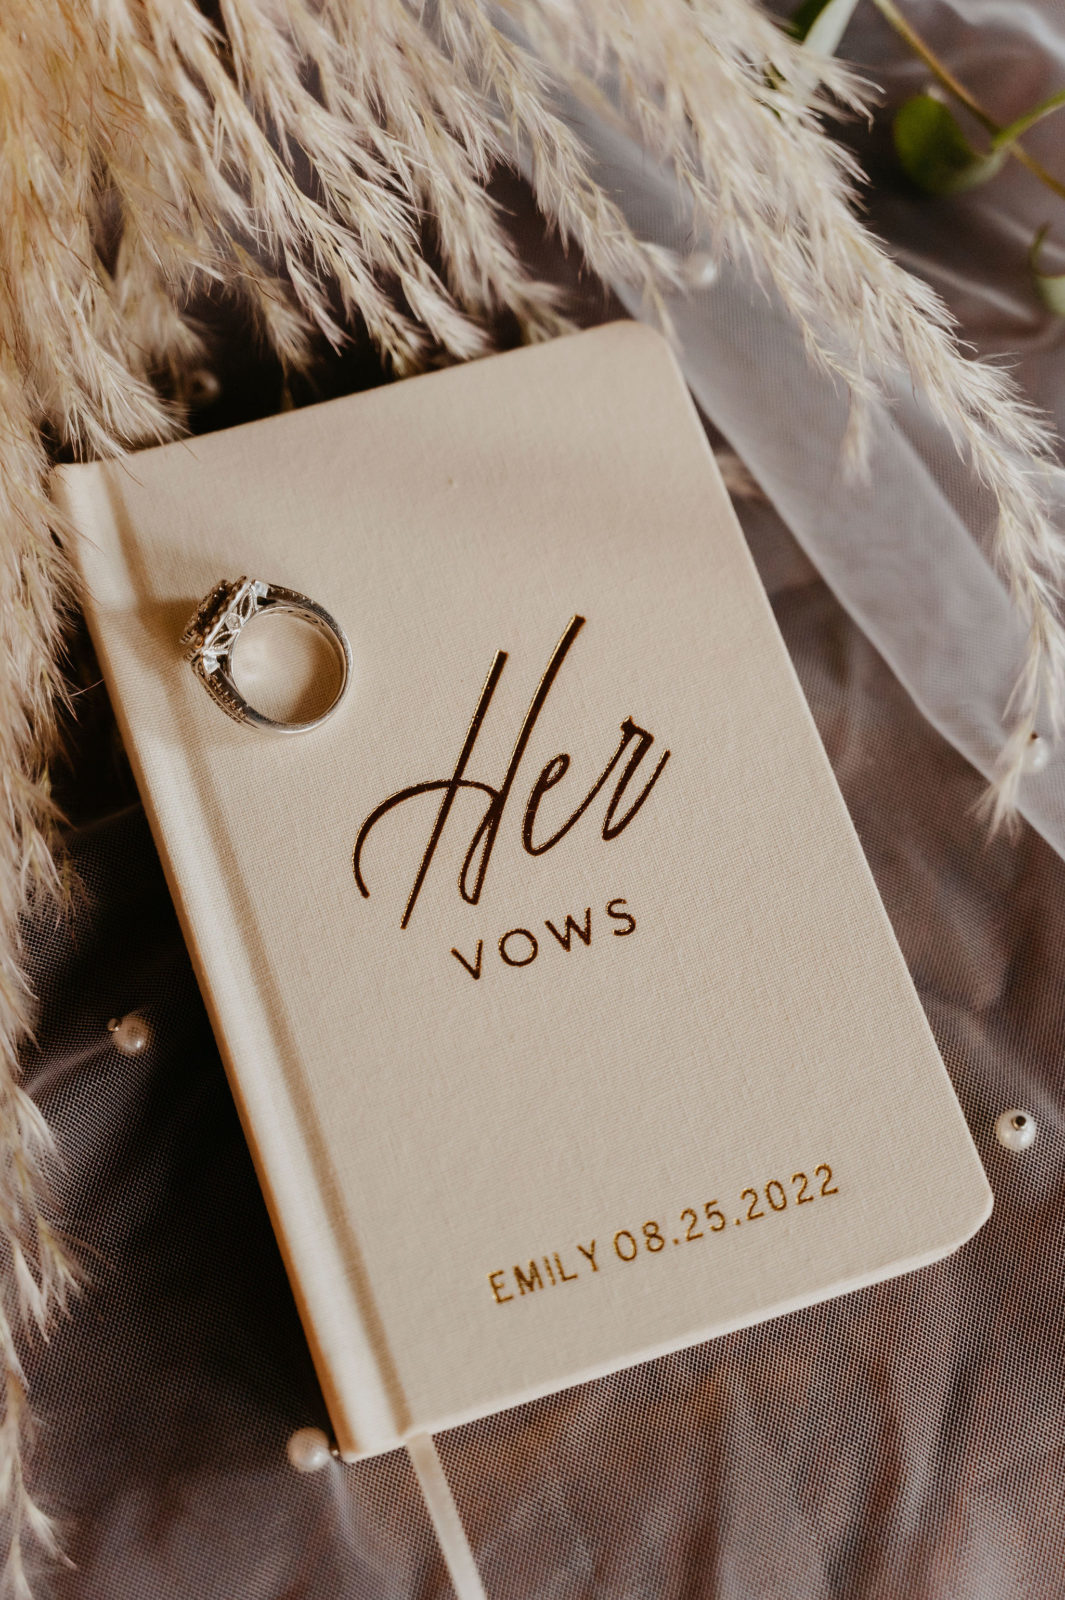 Bridal vow books with wedding date, custom vow books